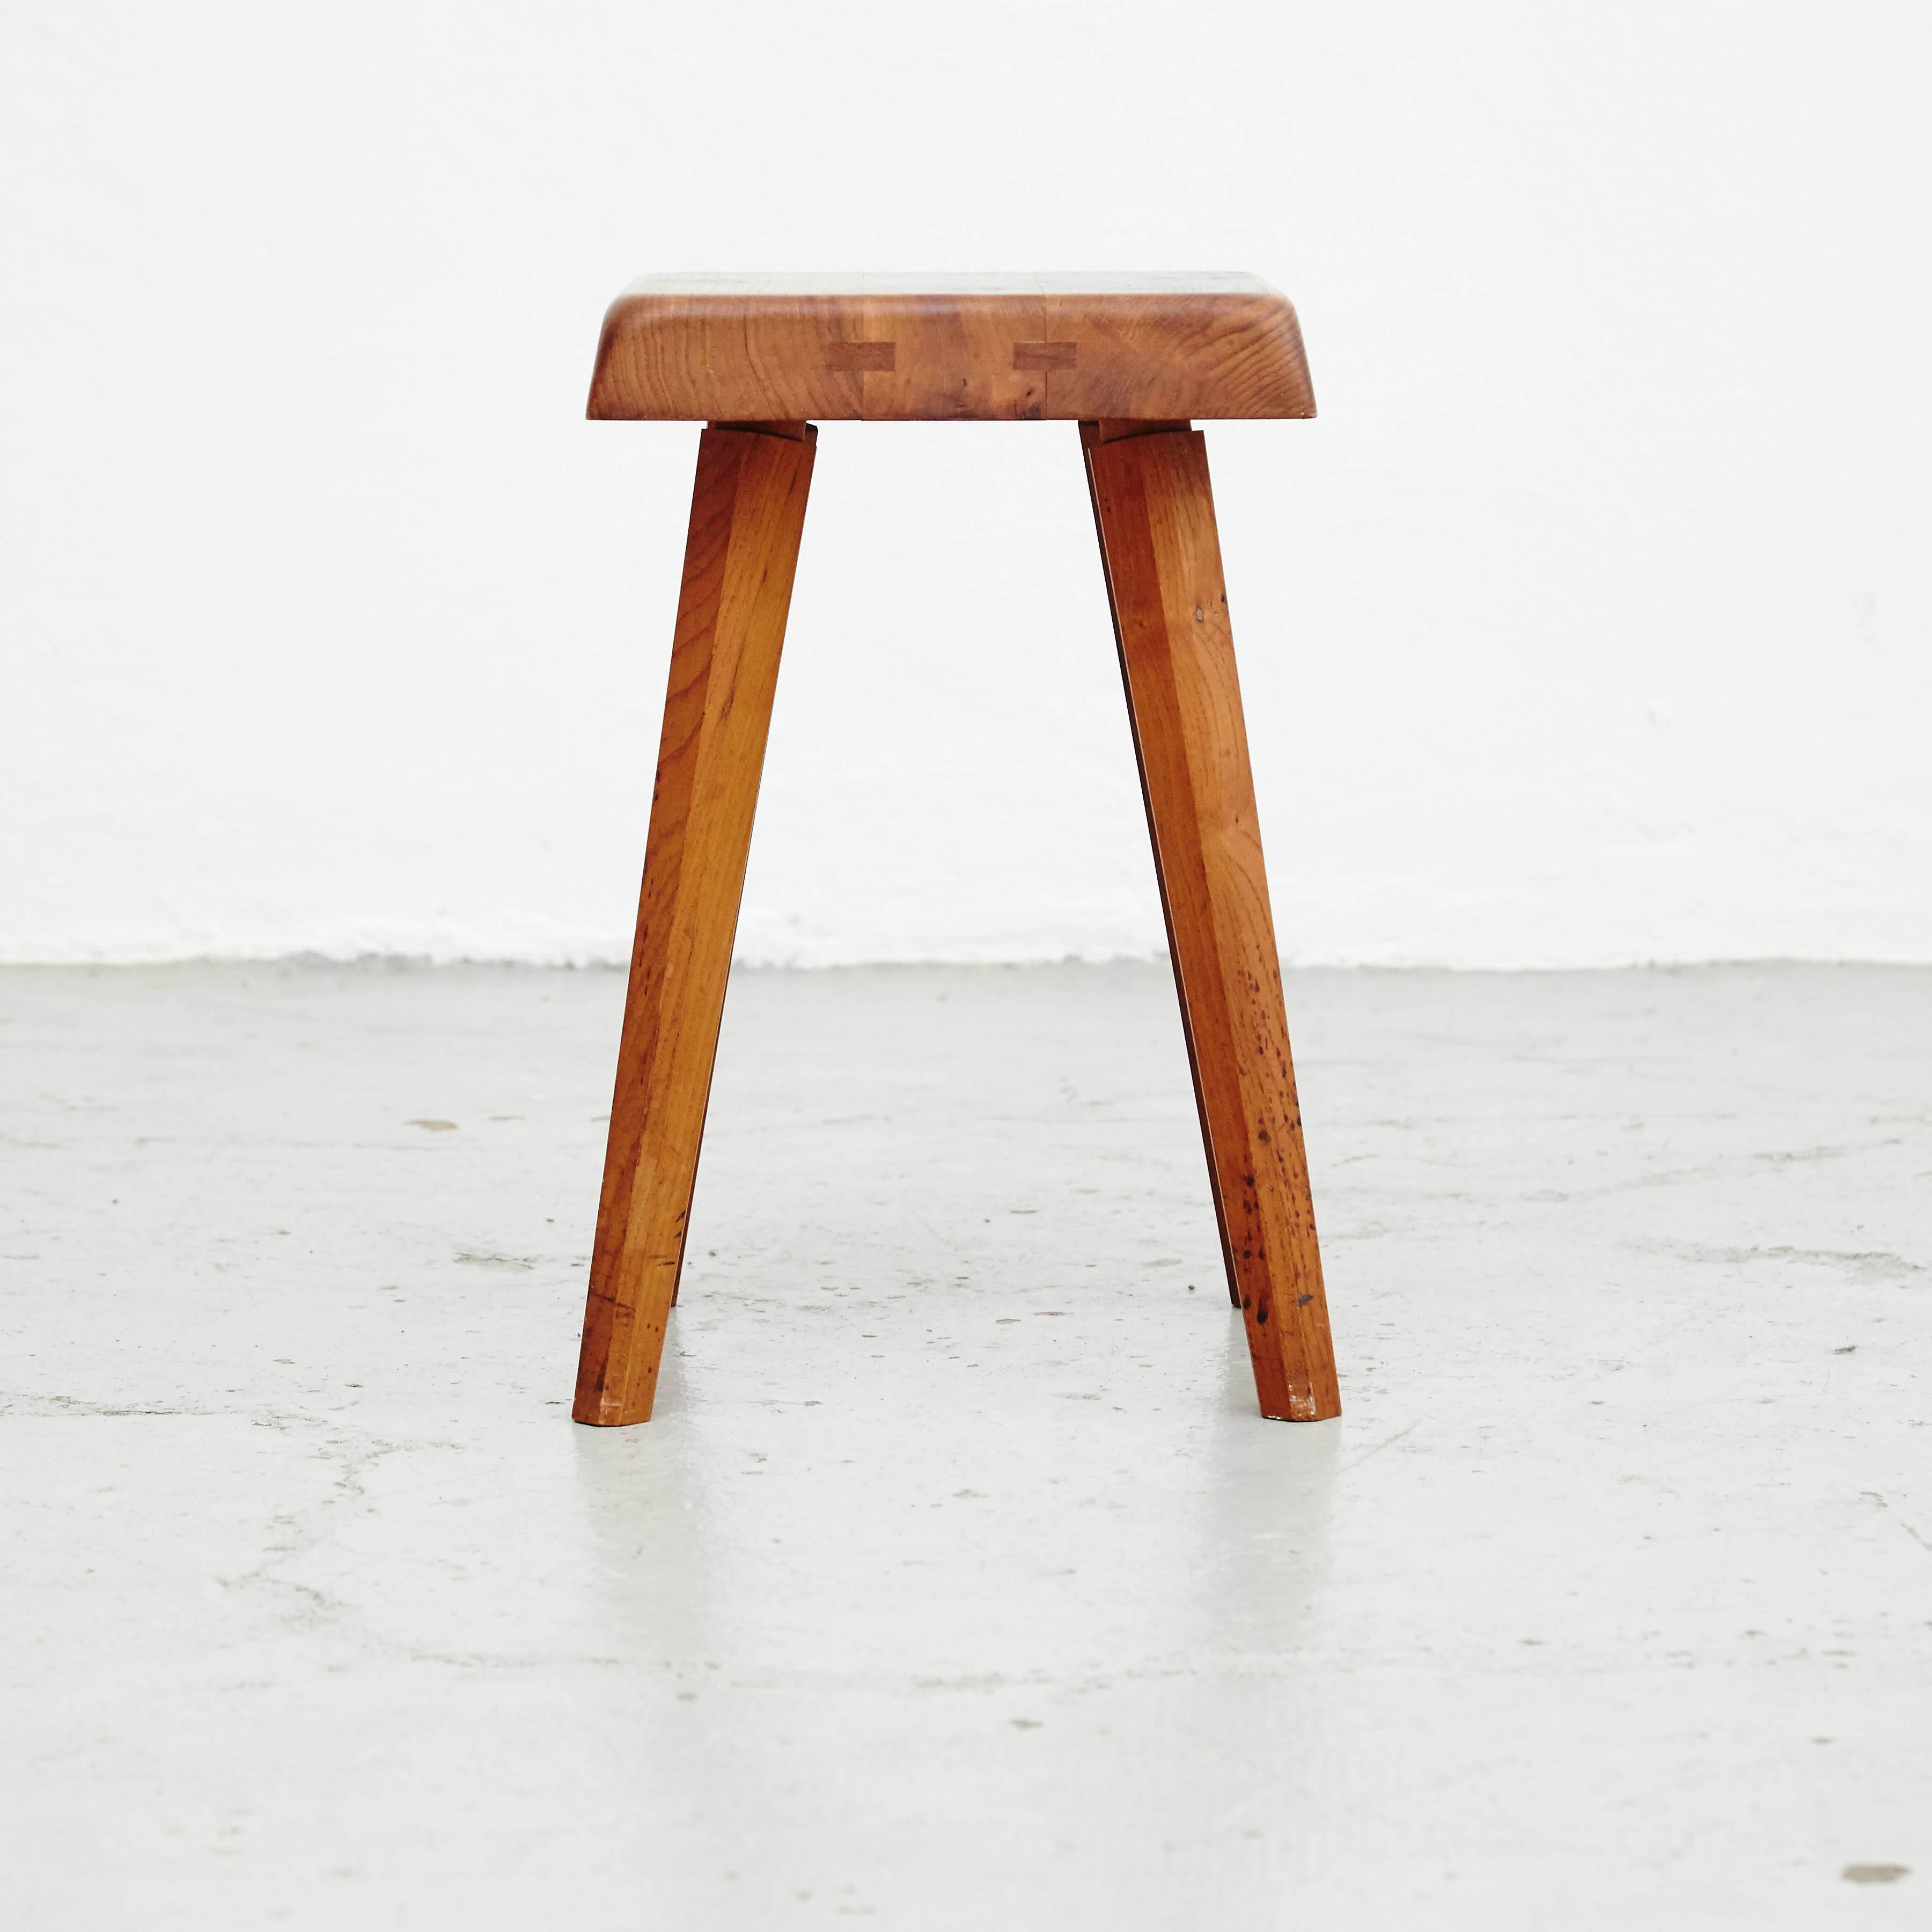 Stool designed by Pierre Chapo, manufactured in France, 1960s.

Solid elmwood.

In good original condition, with minor wear consistent with age and use, preserving a beautiful patina.

Pierre Chapo is born in a family of craftsmen. After his